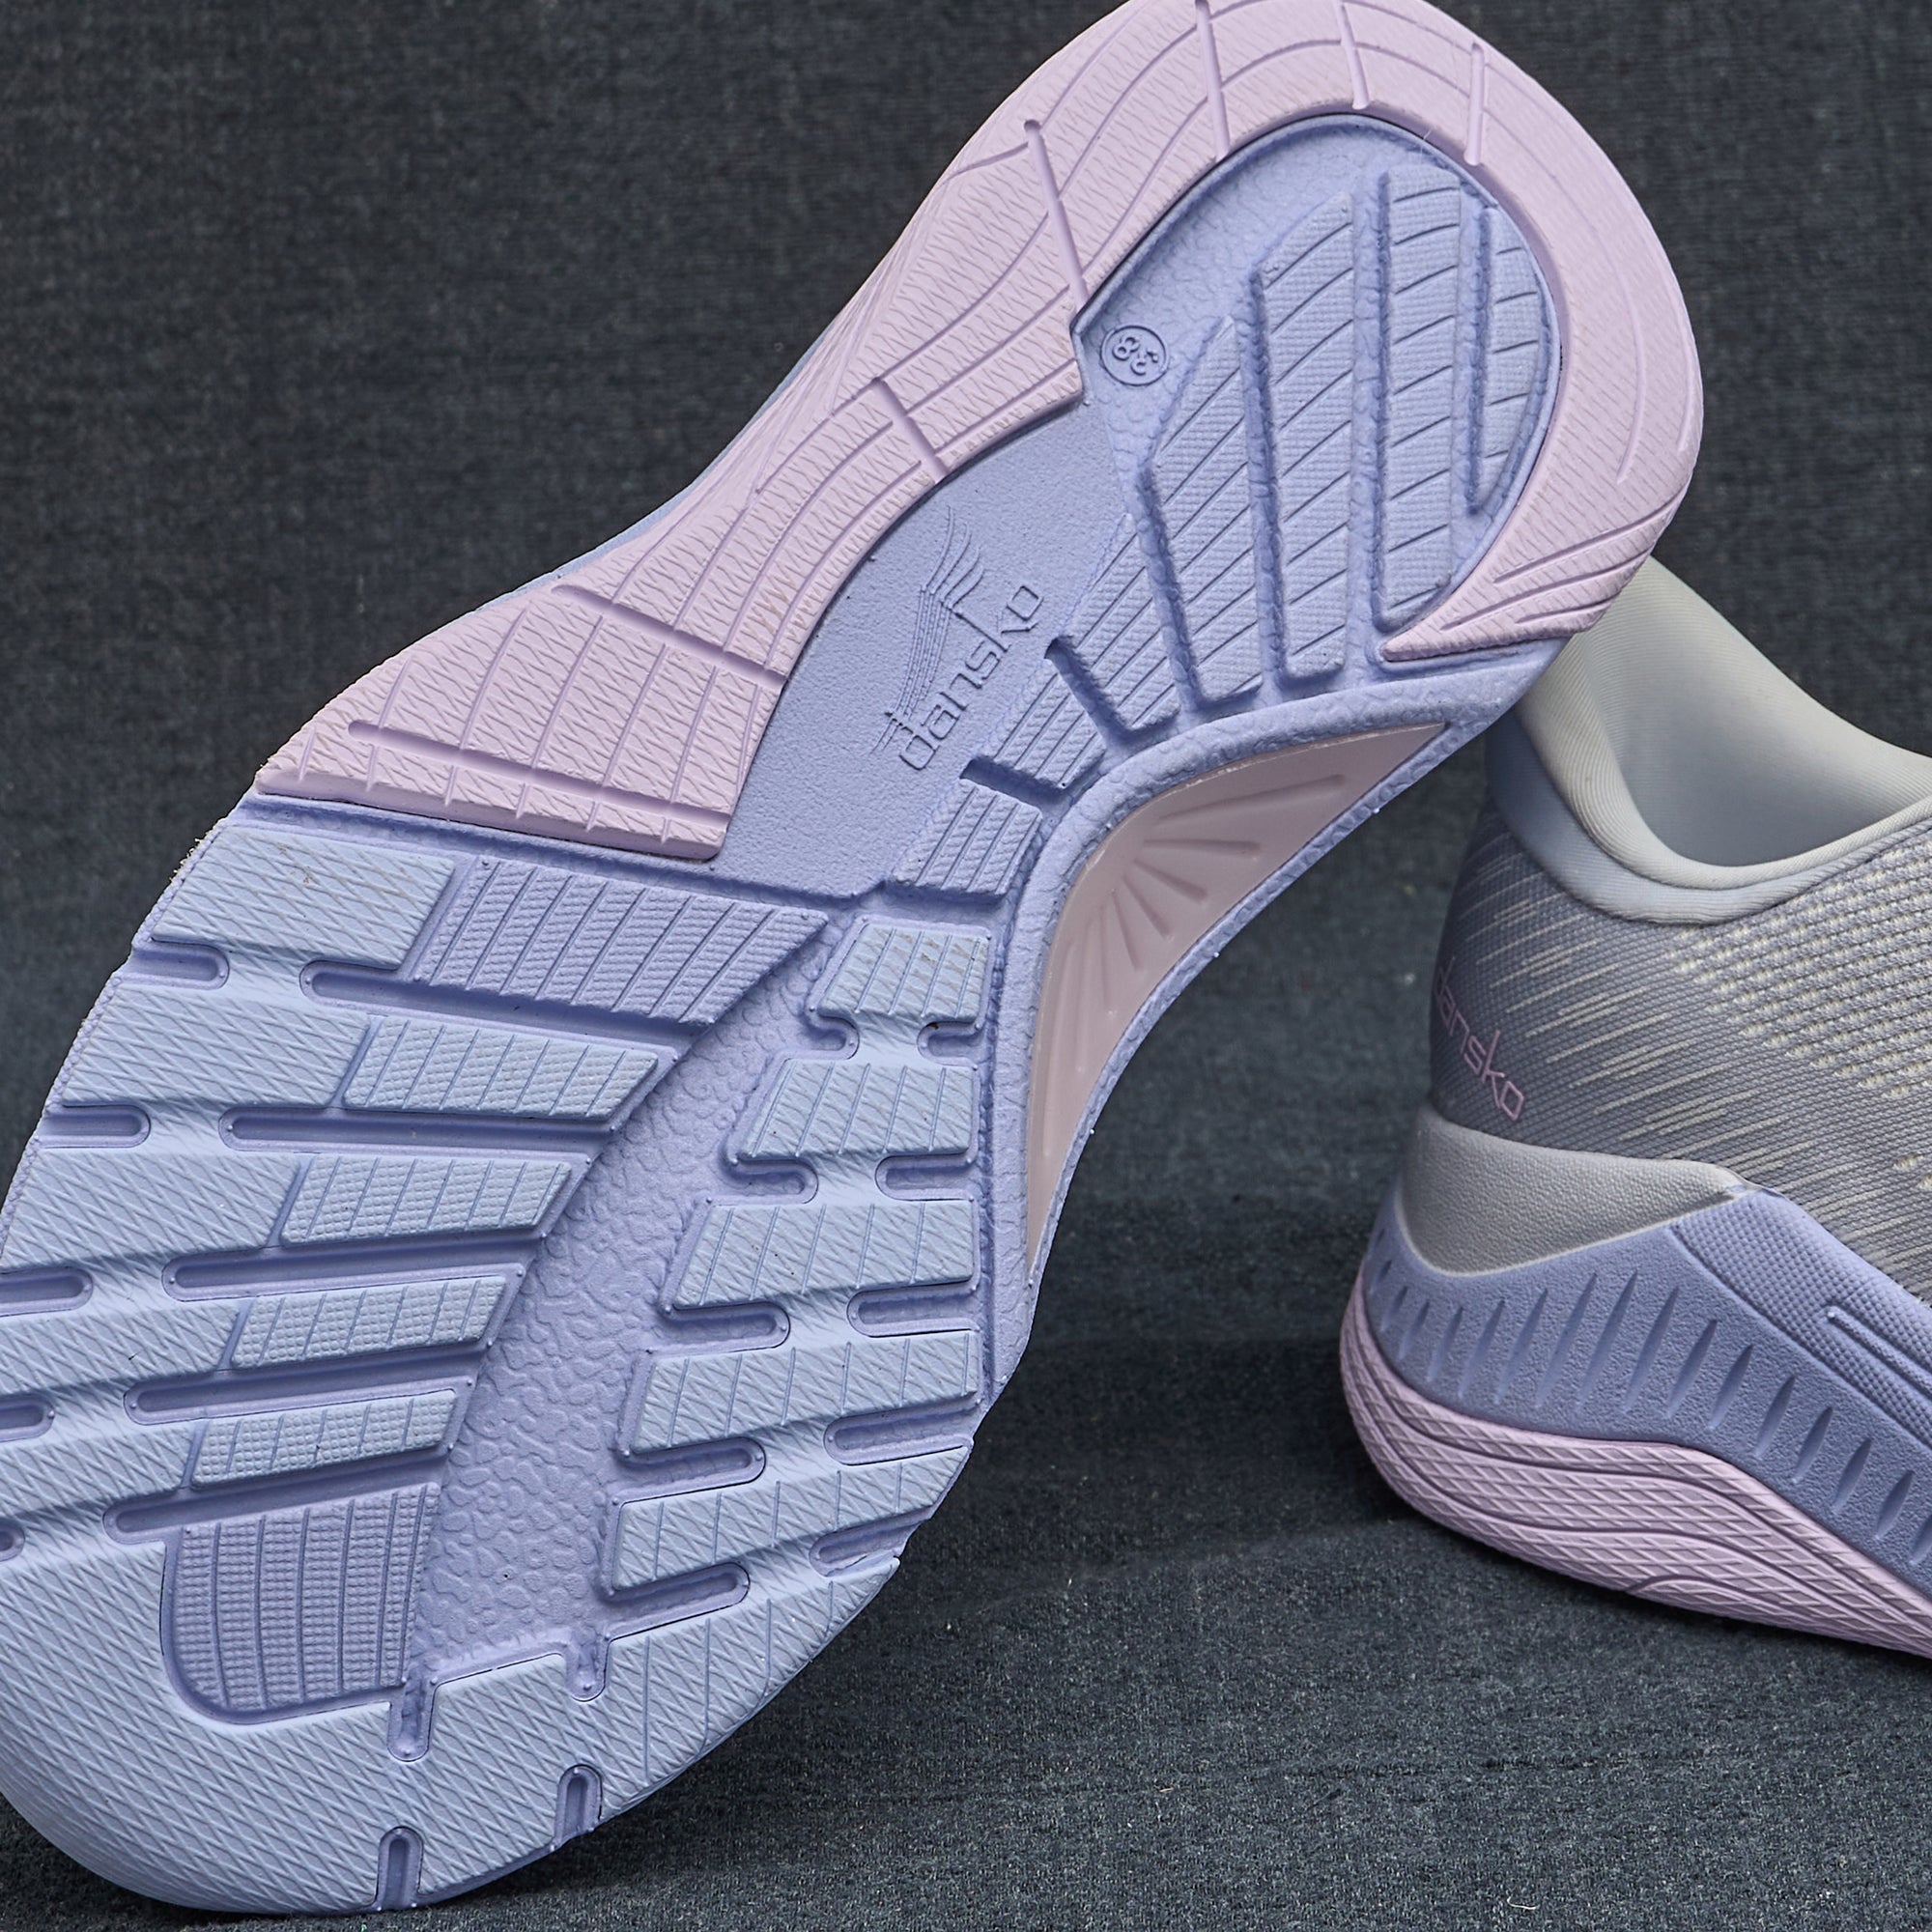 A closeup of our active walking sneakers closely showing the design and pattern of the EVA outsole.